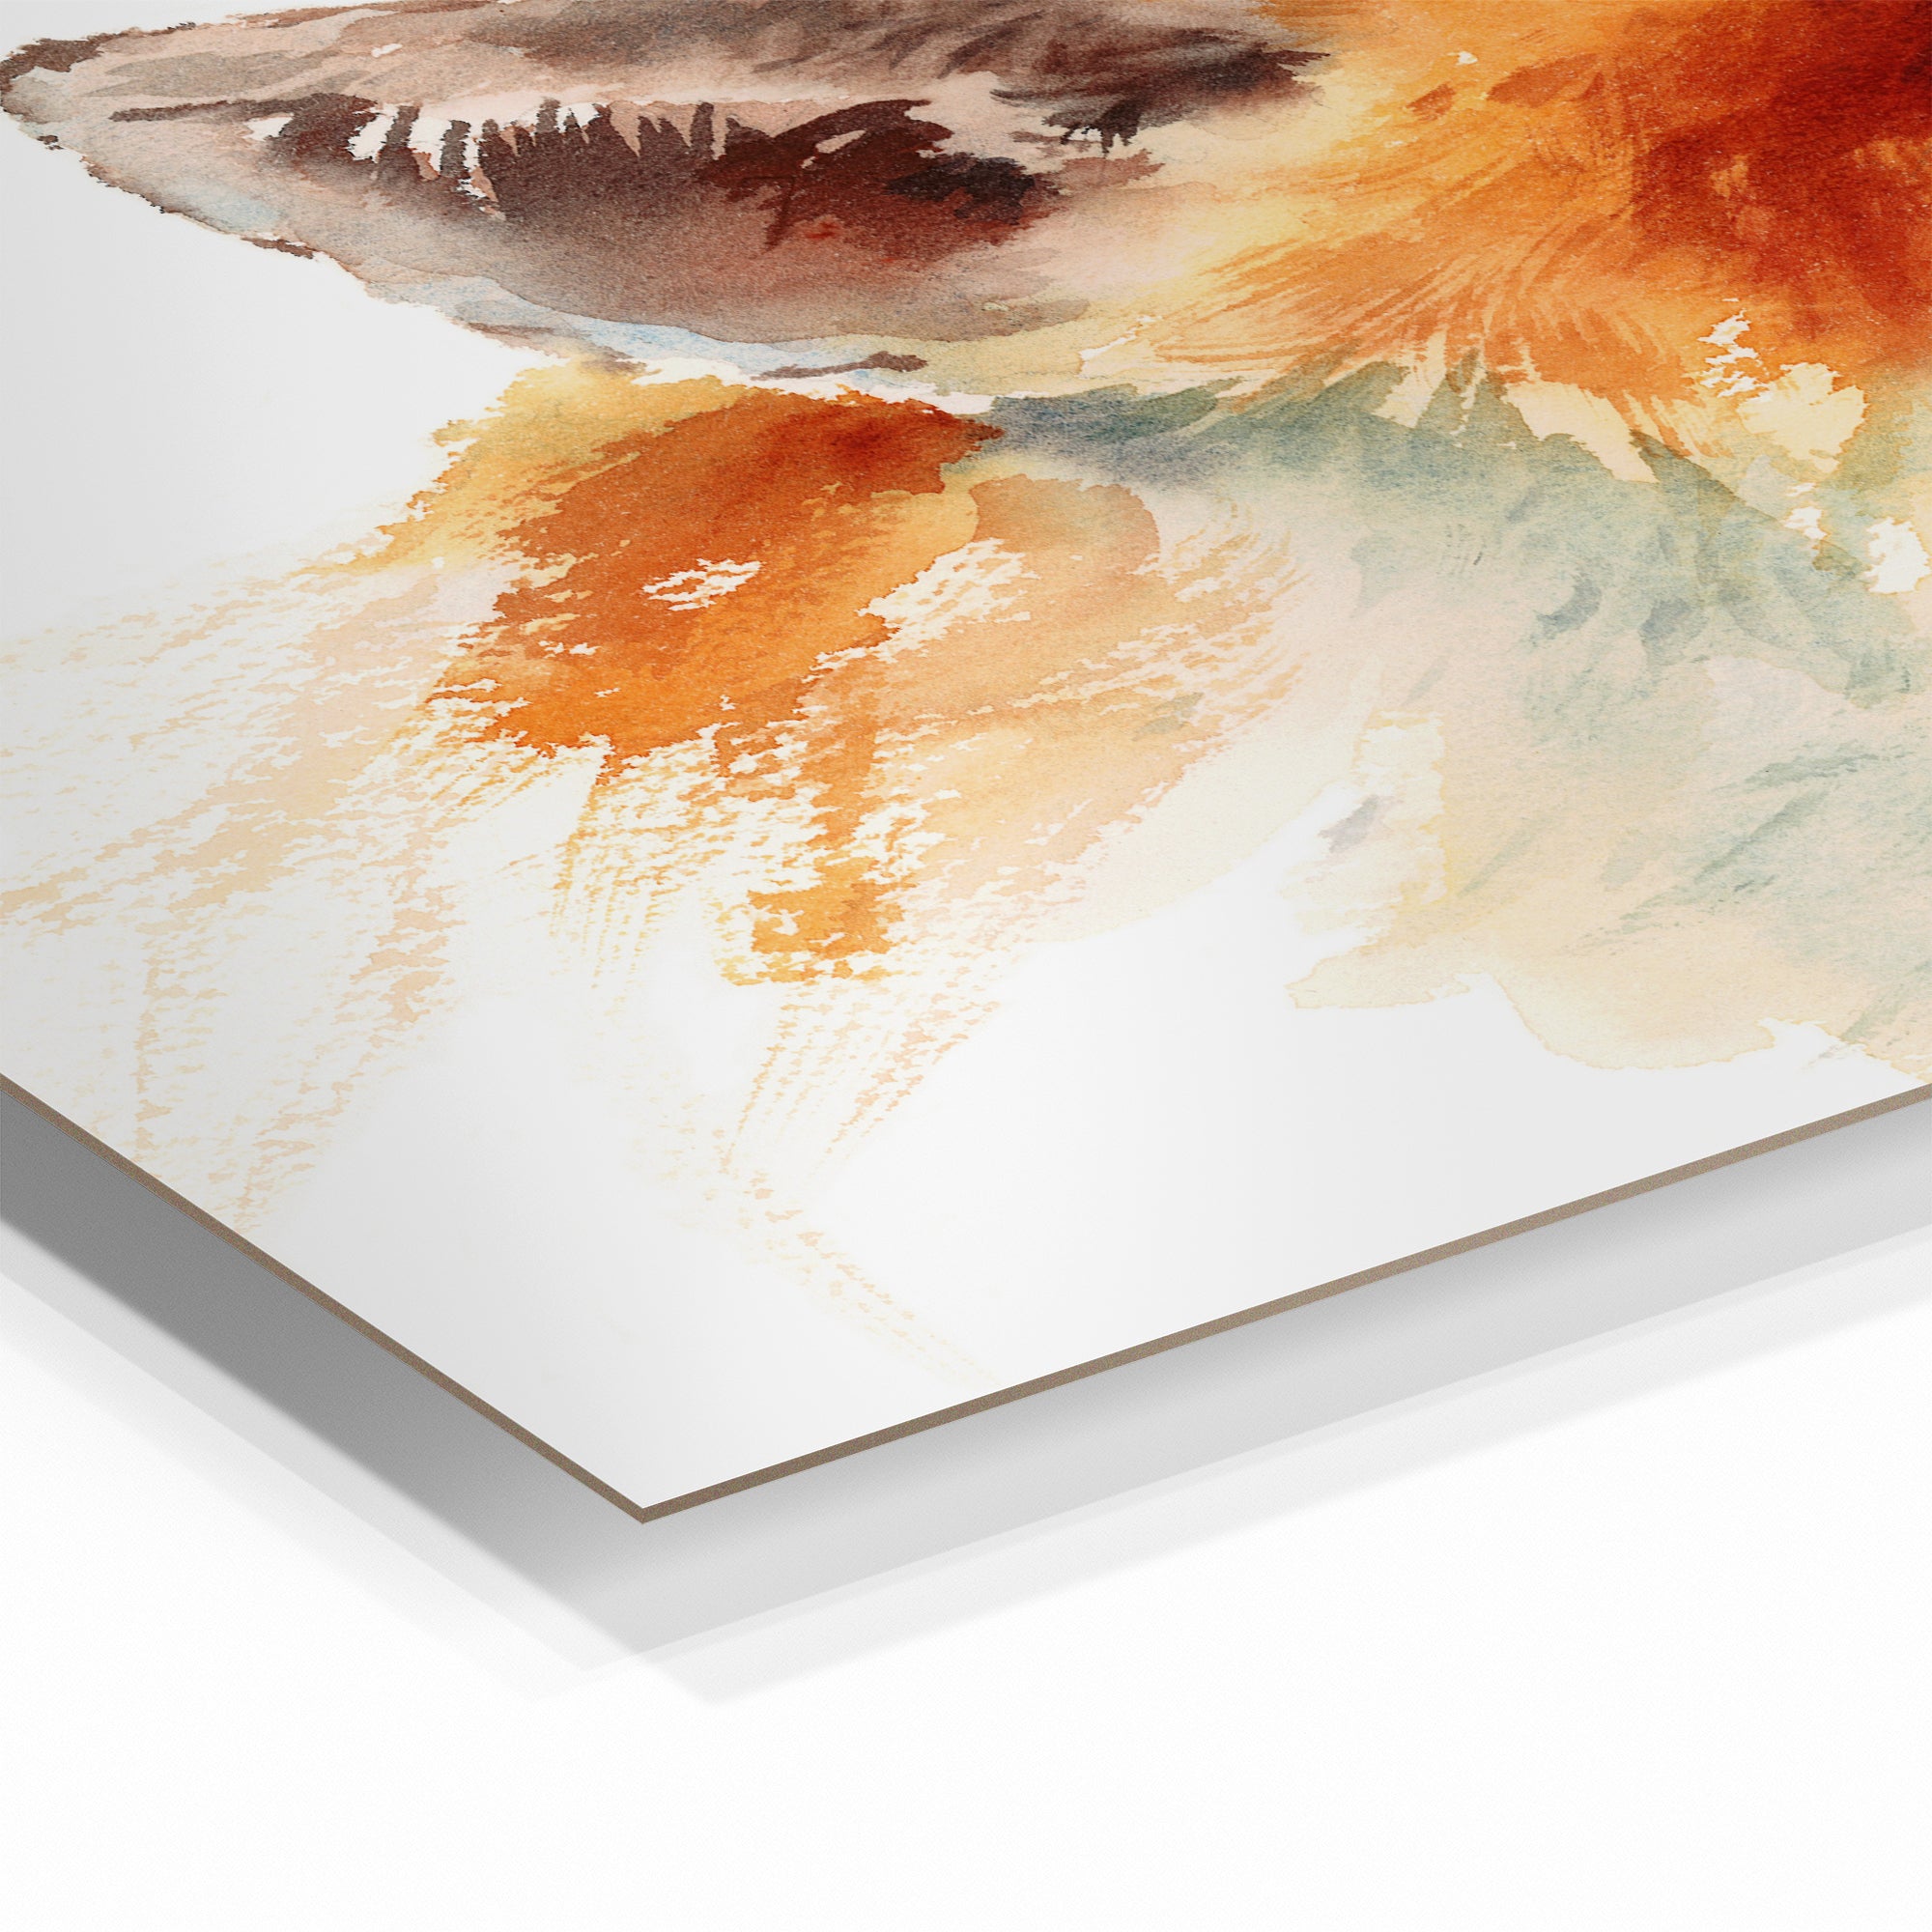 Photo image on canvas - abstraction, beige stone (beige)